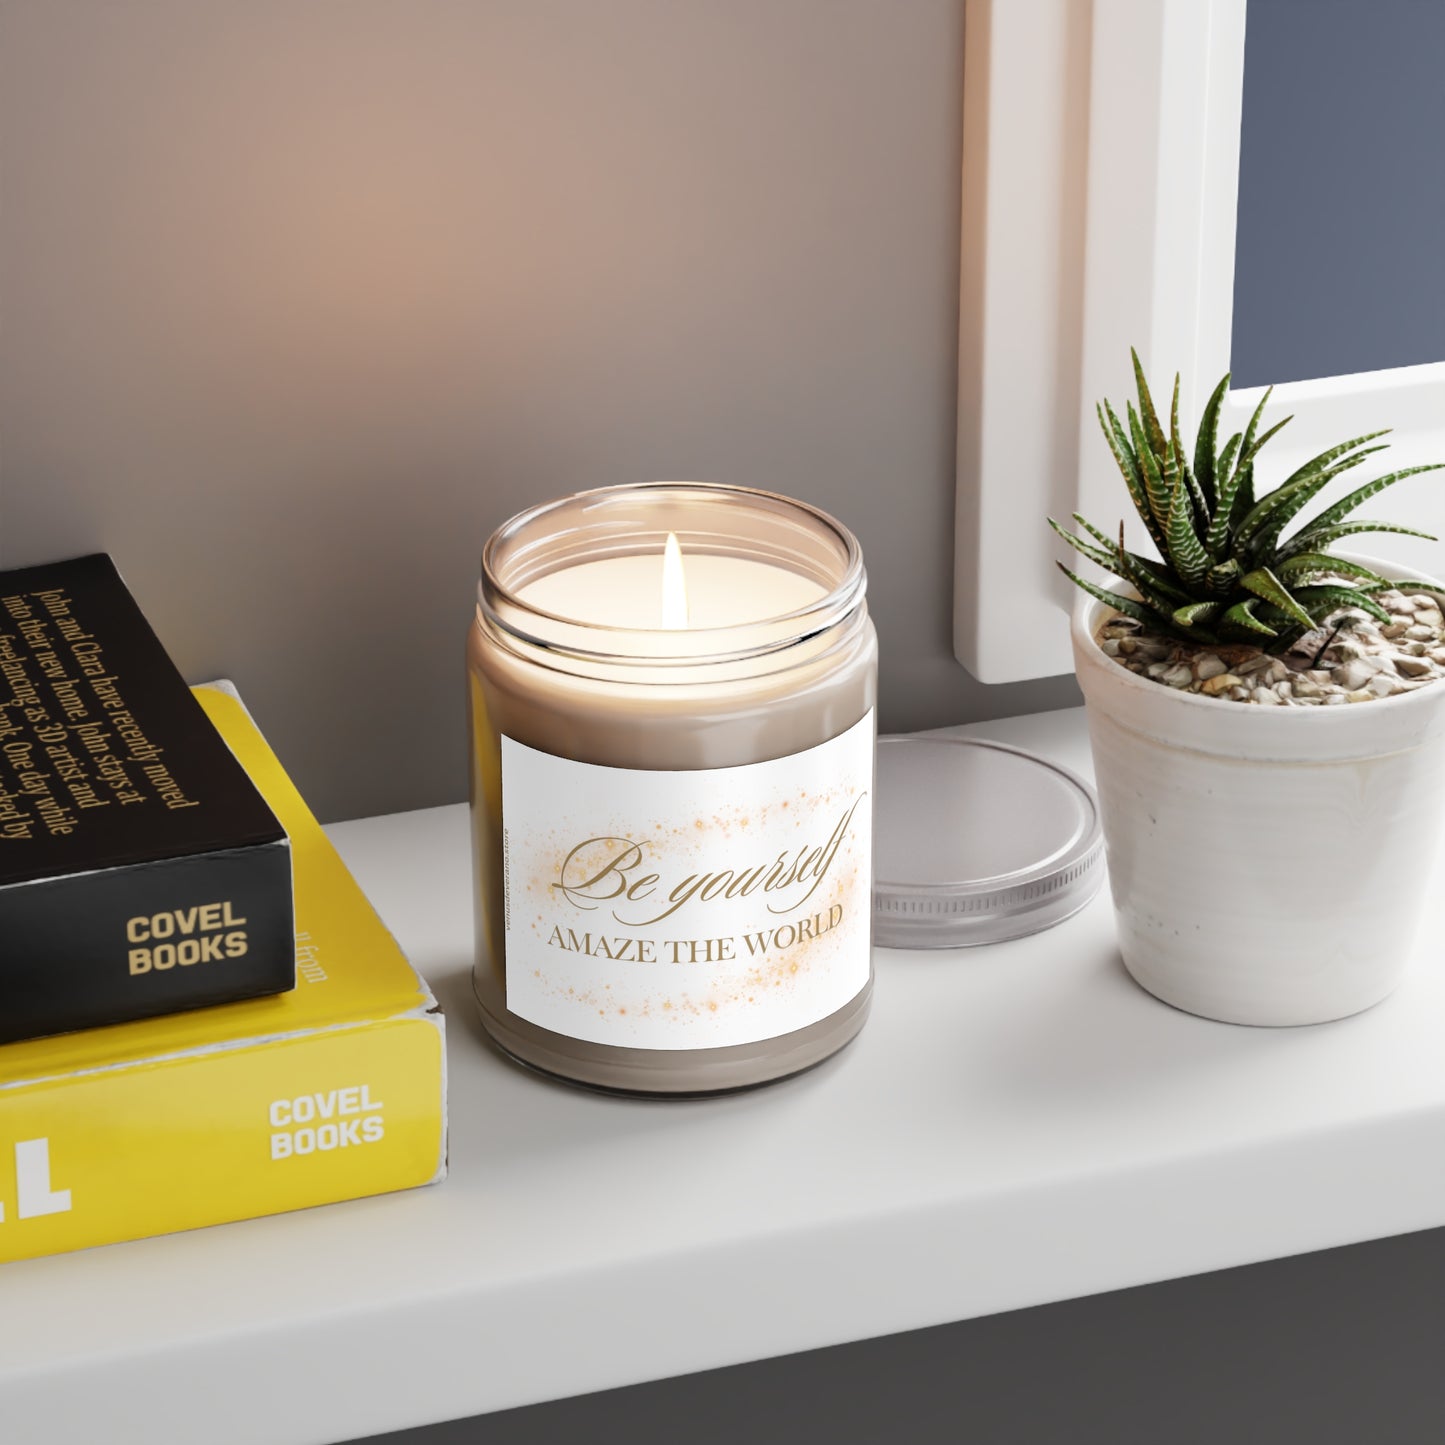 Scented Candles, 9oz - BE YOURSELF Amaze the World- Made 100% natural soy wax blend and cotton wick - Vanilla Bean, Comfort Spice and Sea Breeze fragrances available.